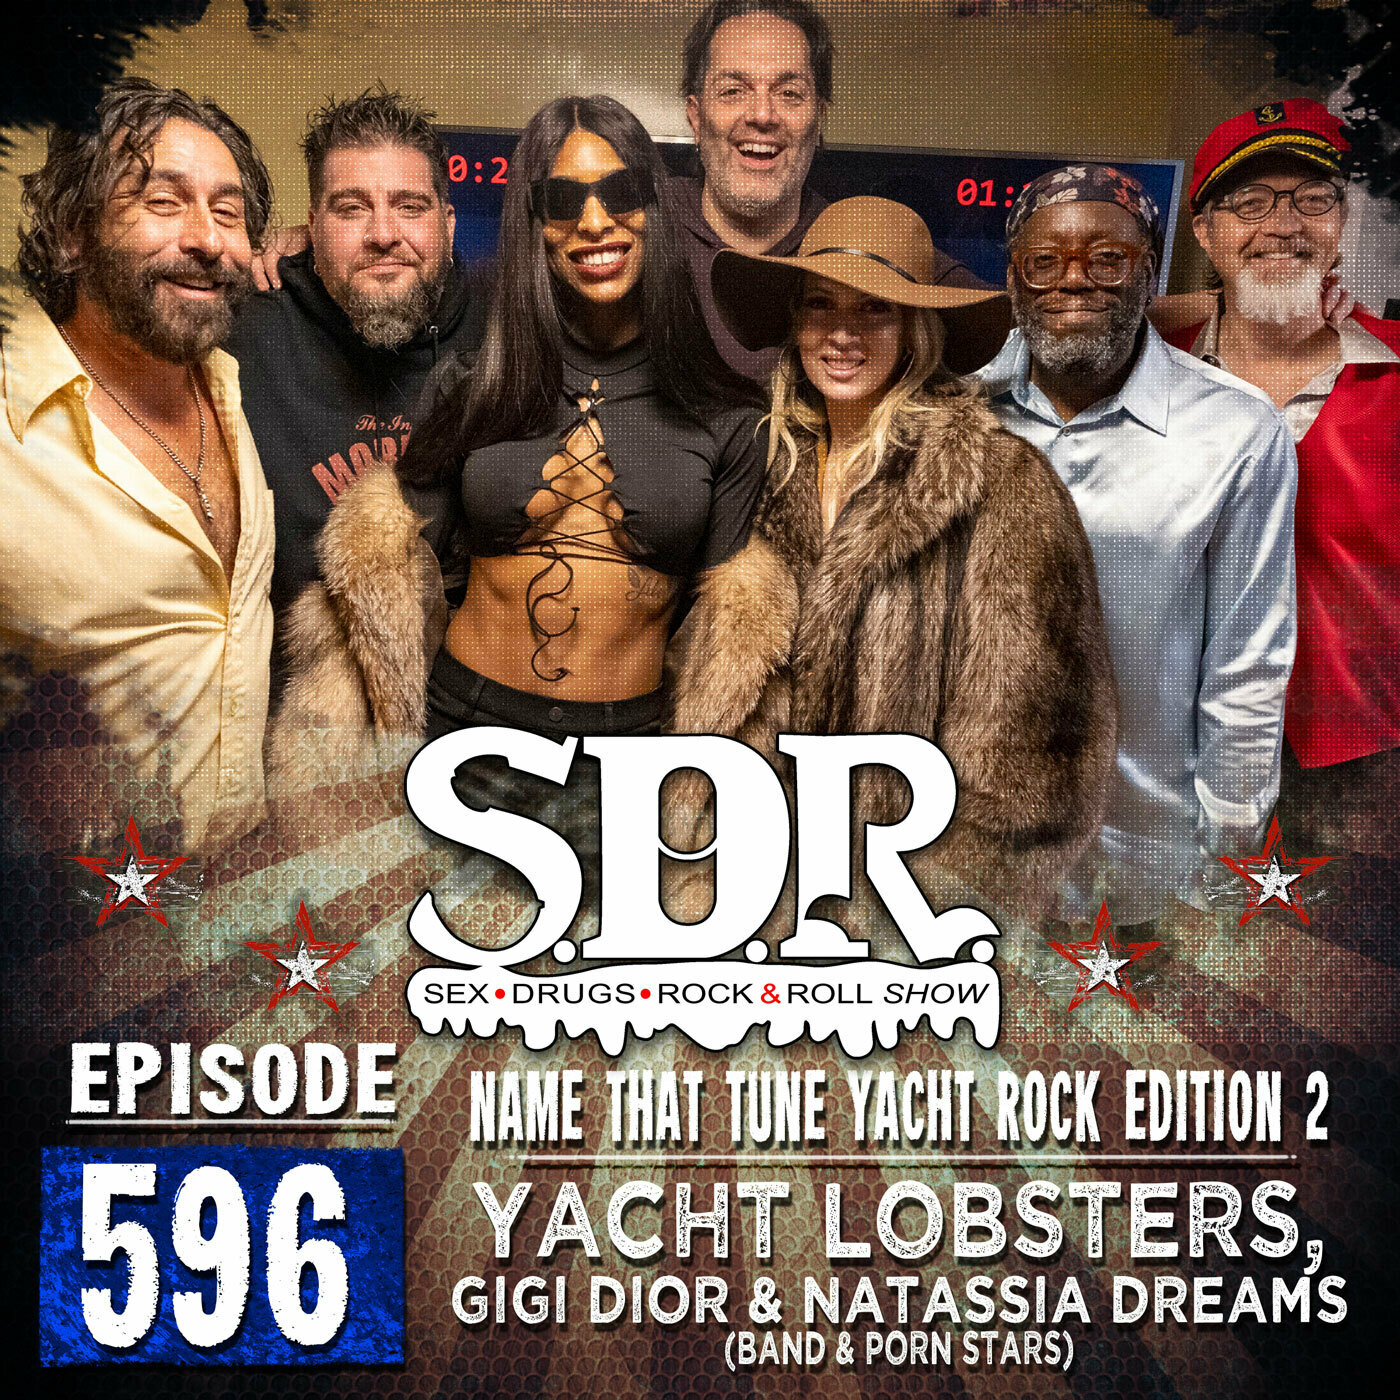 Yacht Lobsters, Gigi Dior And Natassia Dreams (Band And Porn Stars) - Name That Tune Yacht Rock Edition 2